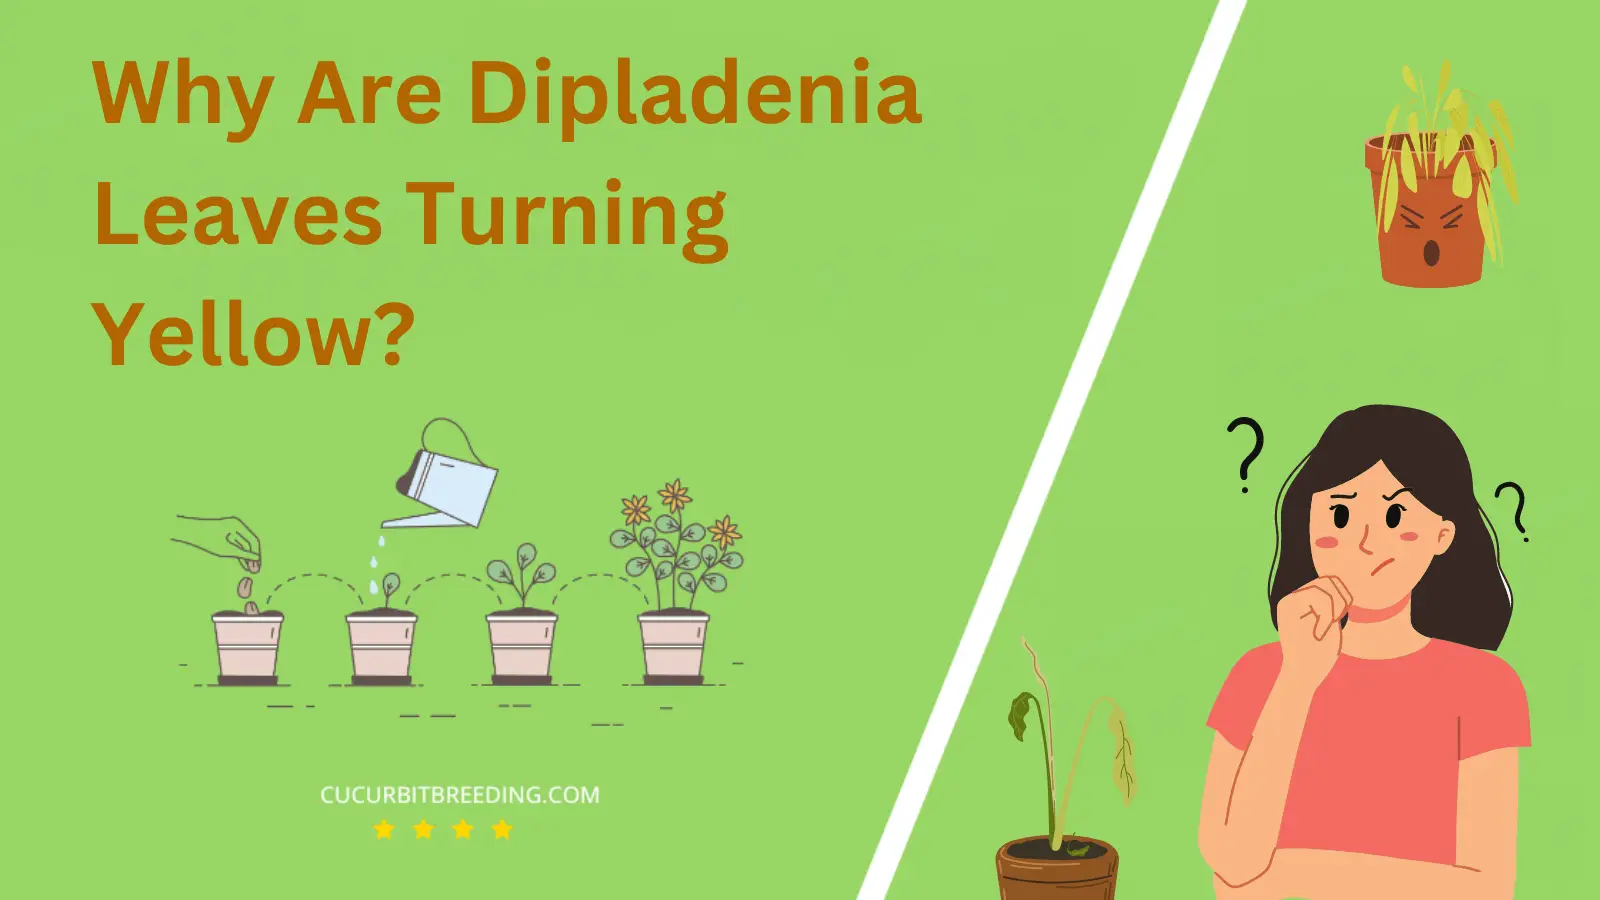 Why Are Dipladenia Leaves Turning Yellow